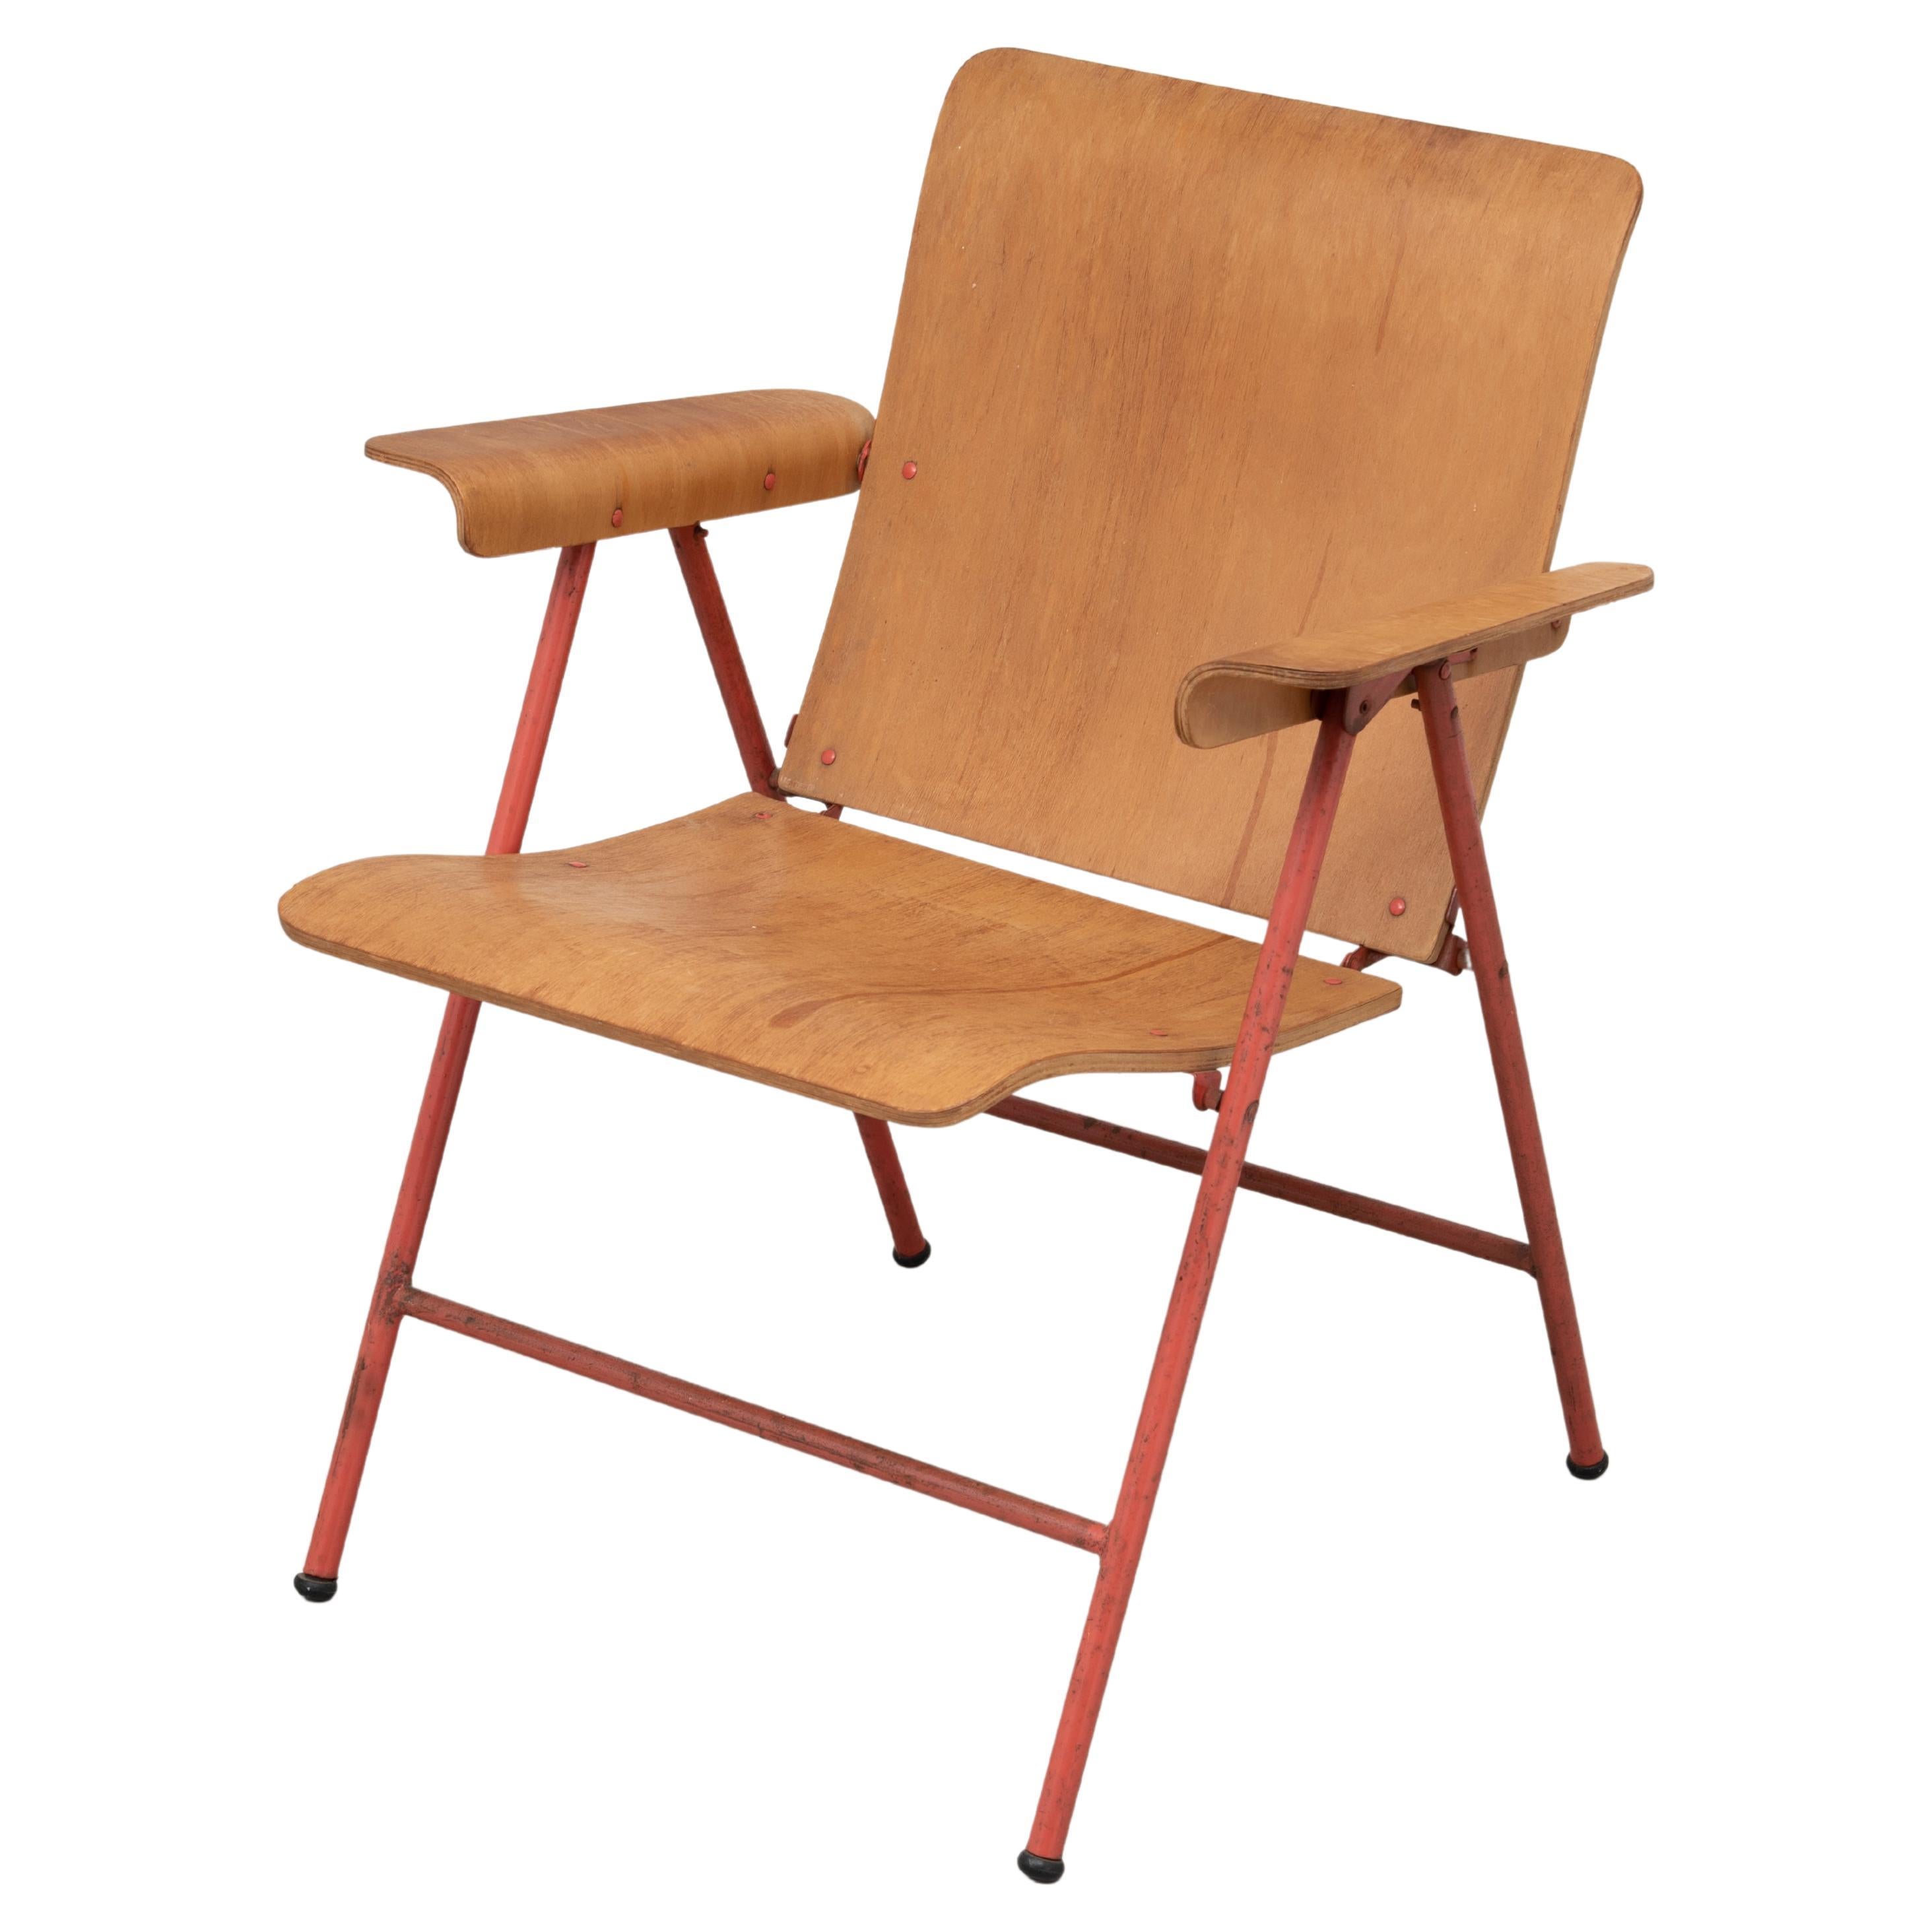 Samson Folding Chair Russel Wright Shwayder Bros Inc. 1950s For Sale